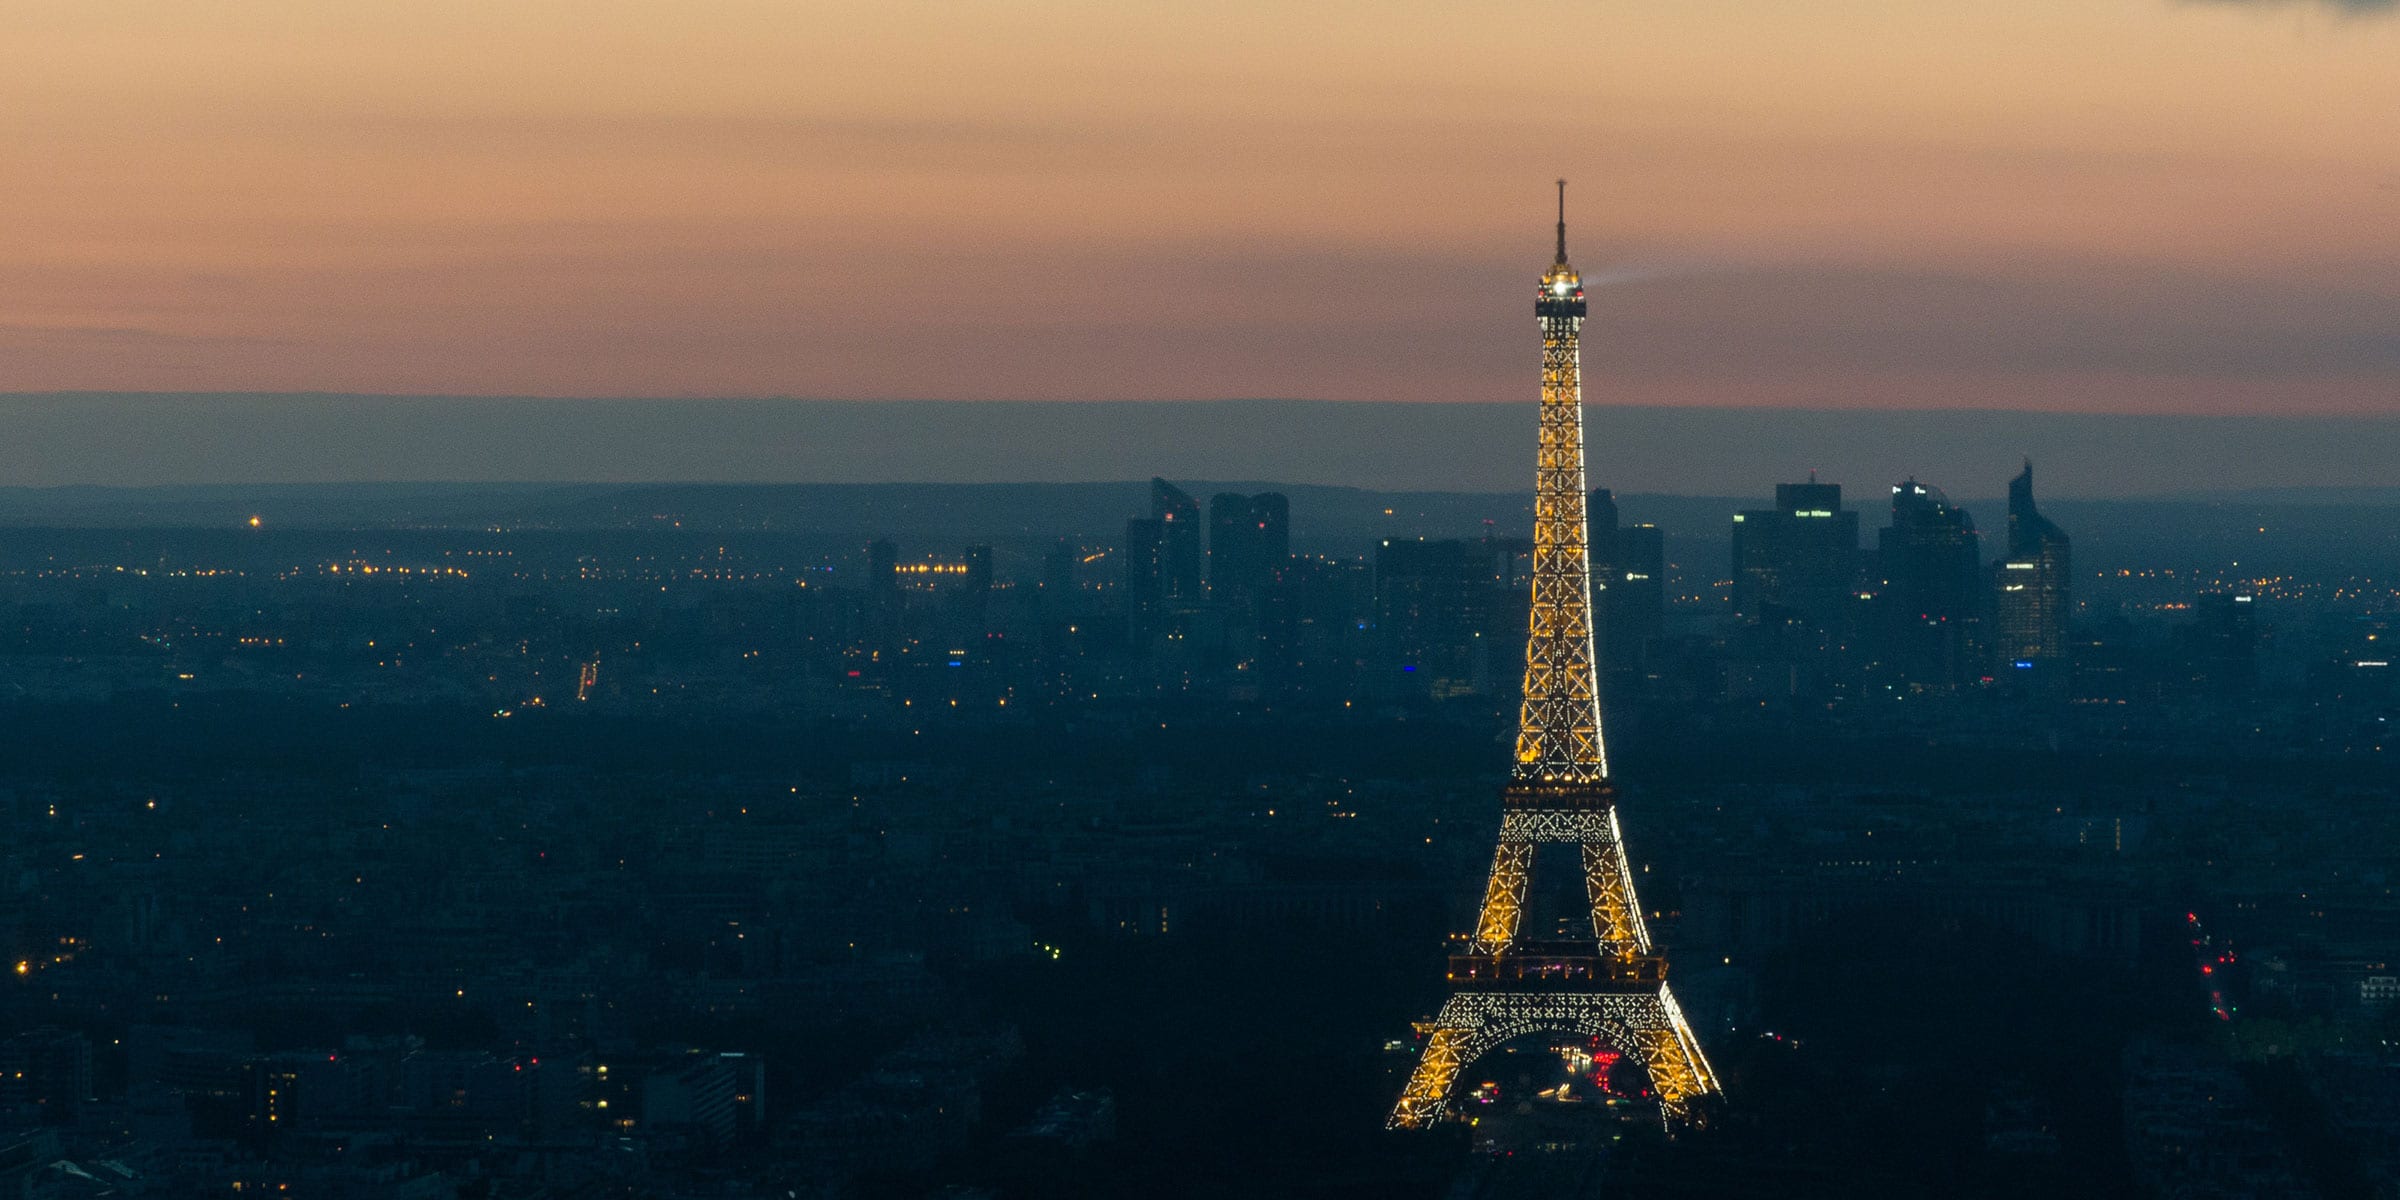 The city of Paris at Sunset with the Eiffel Tower in lights